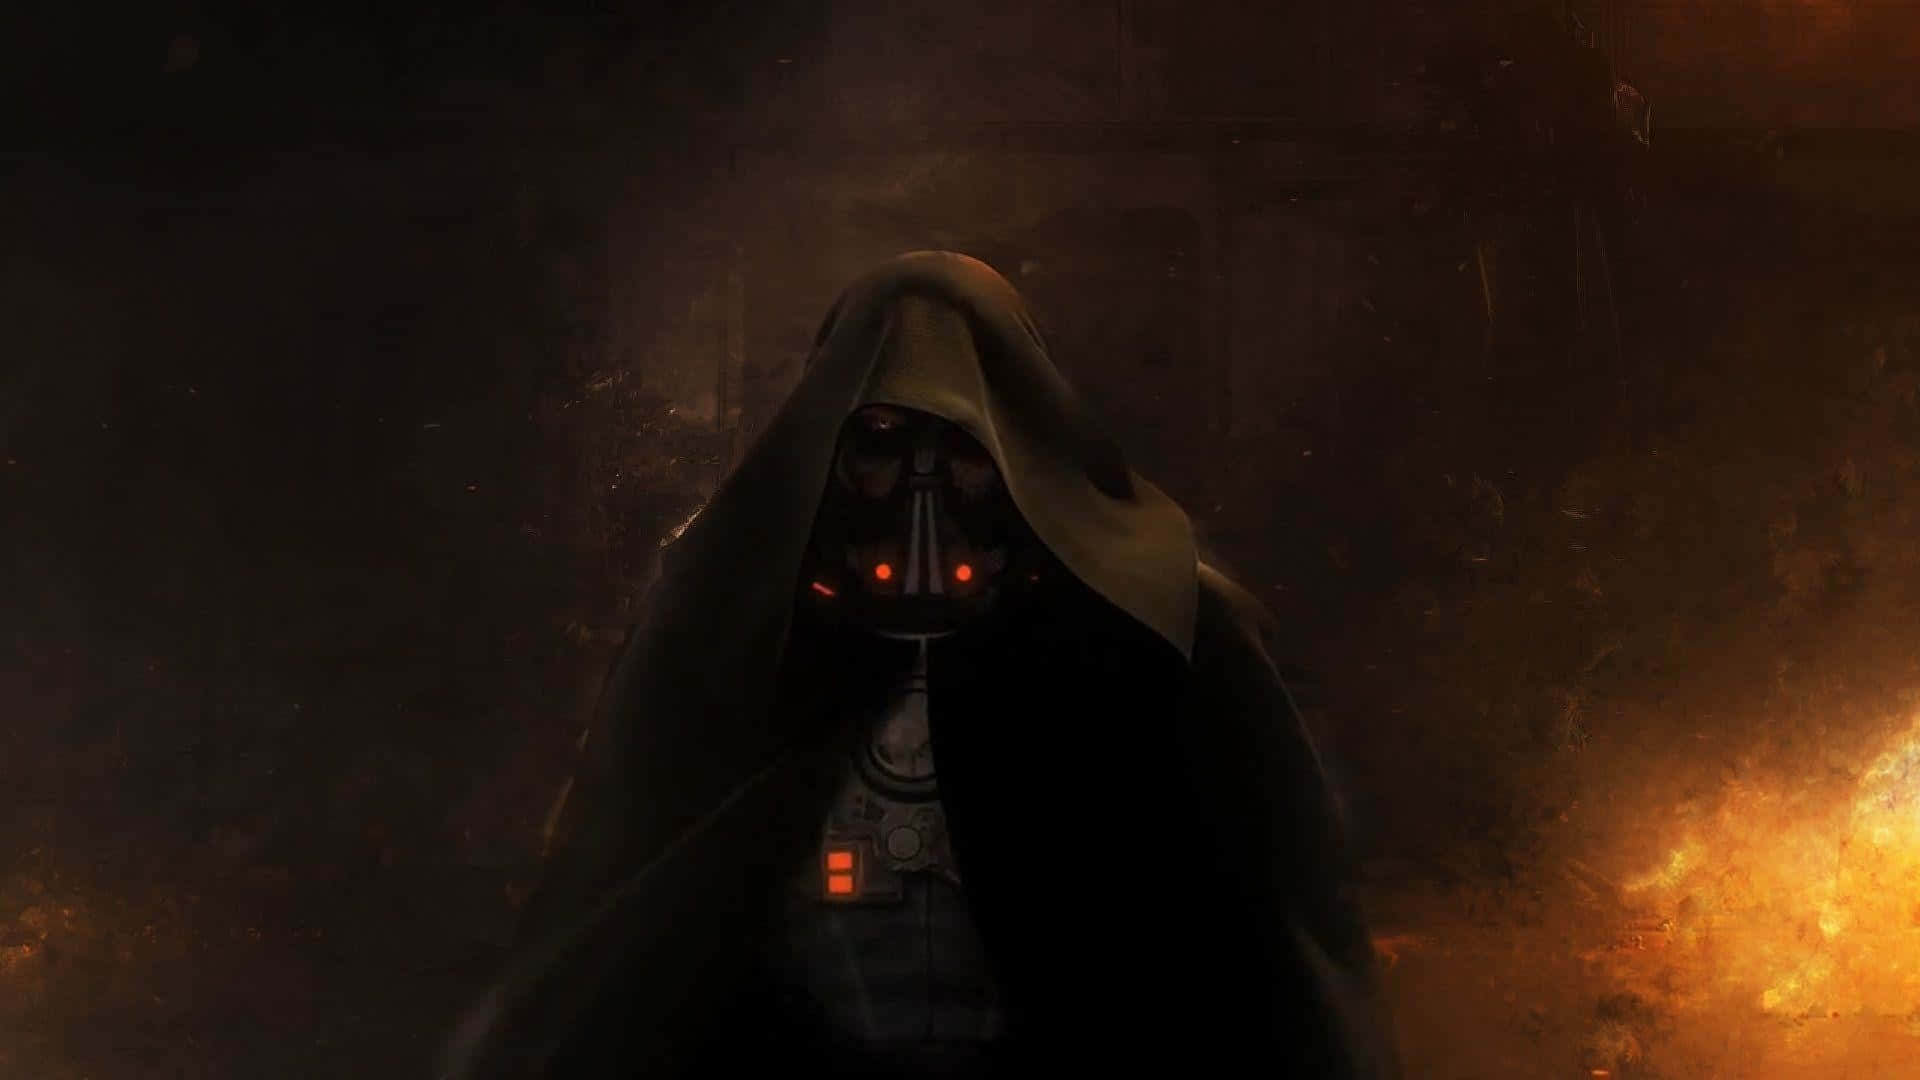 Sith Lord – The Force Of Darkness